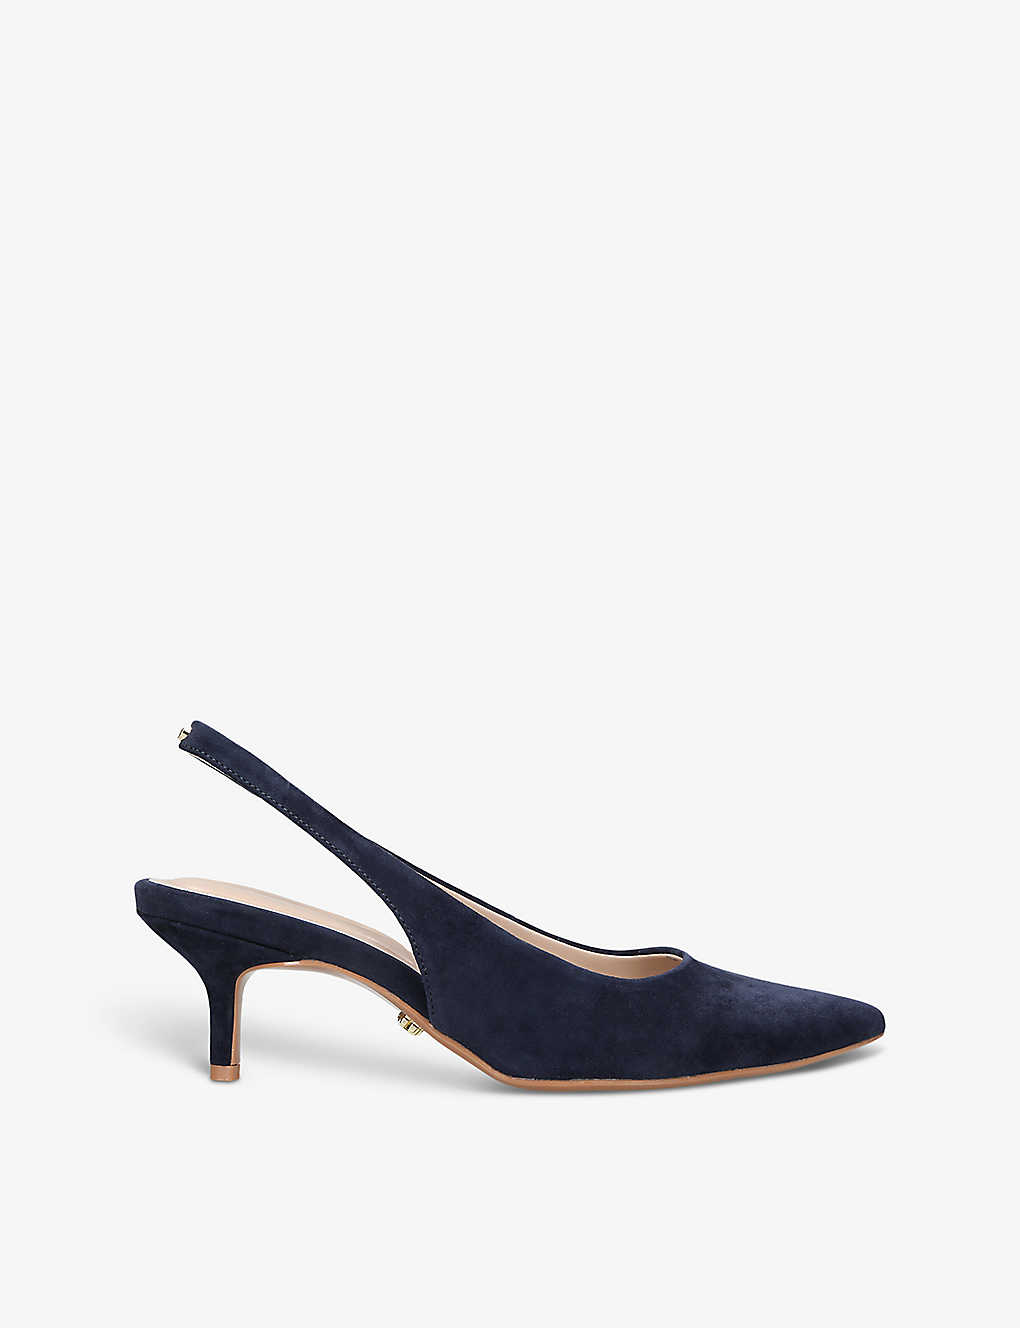 Carvela Womens Navy Symmetry Sling-back Suede Heeled Courts